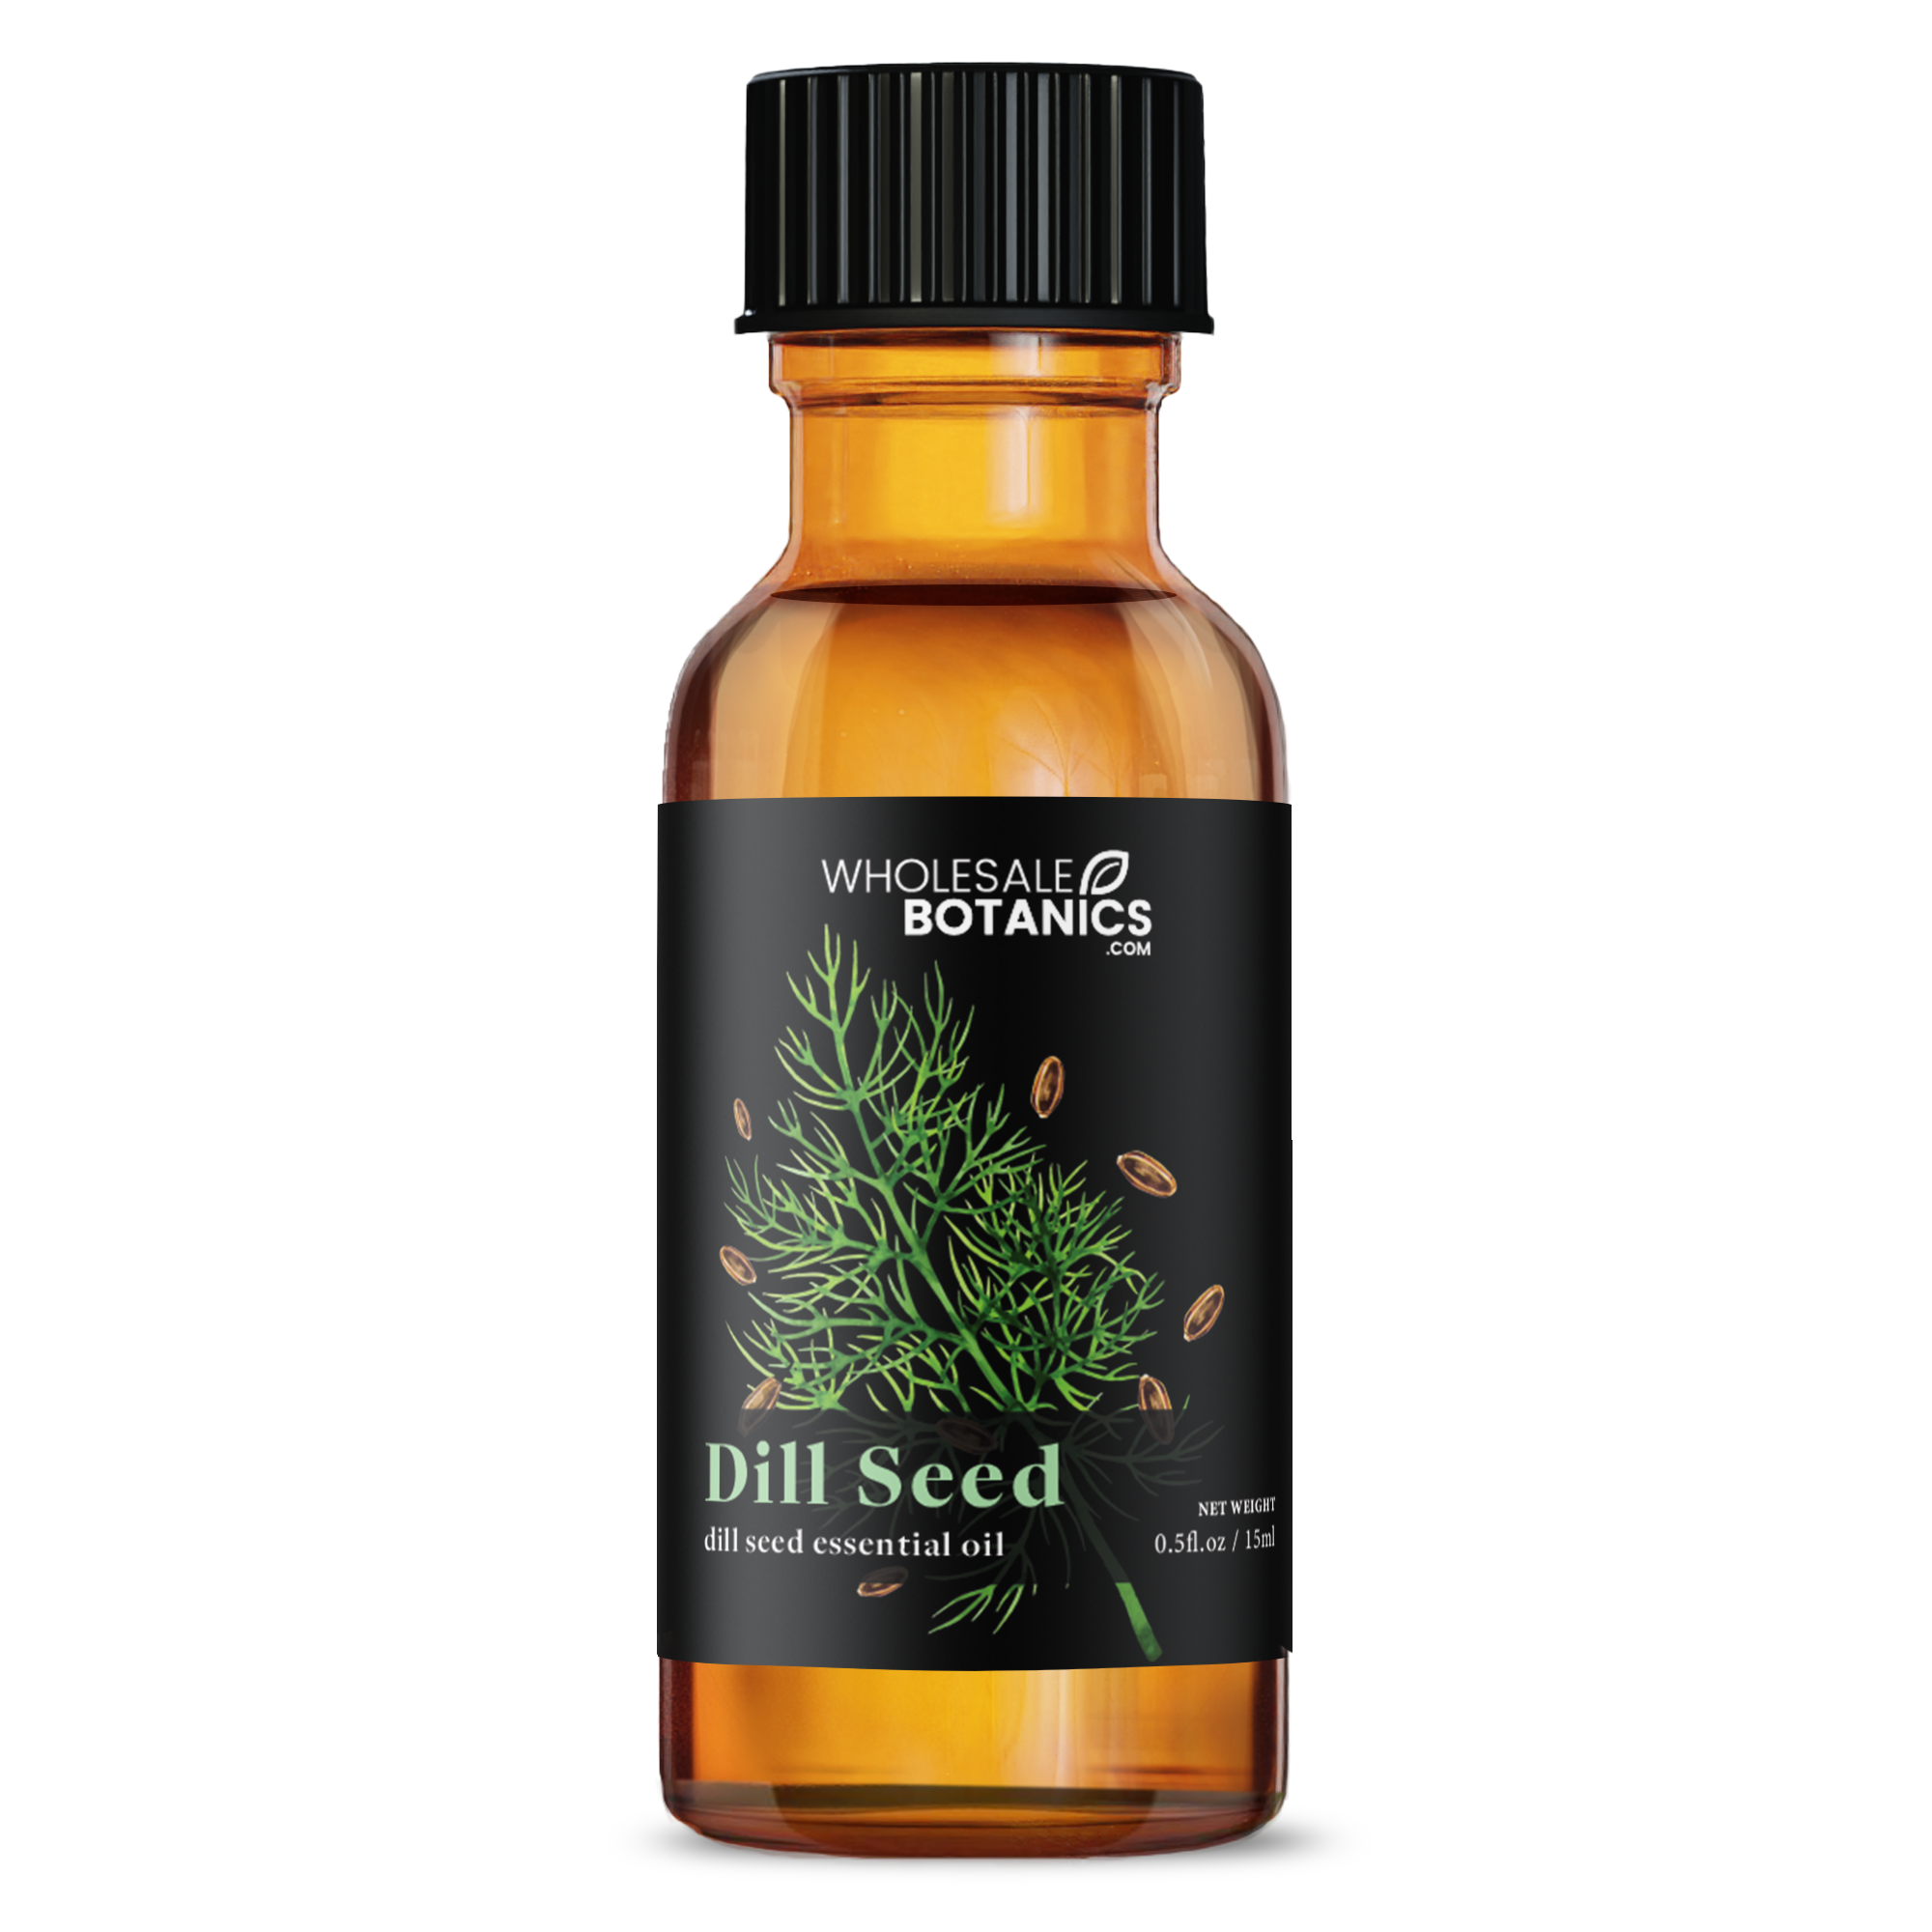 Dill Seed Essential Oil